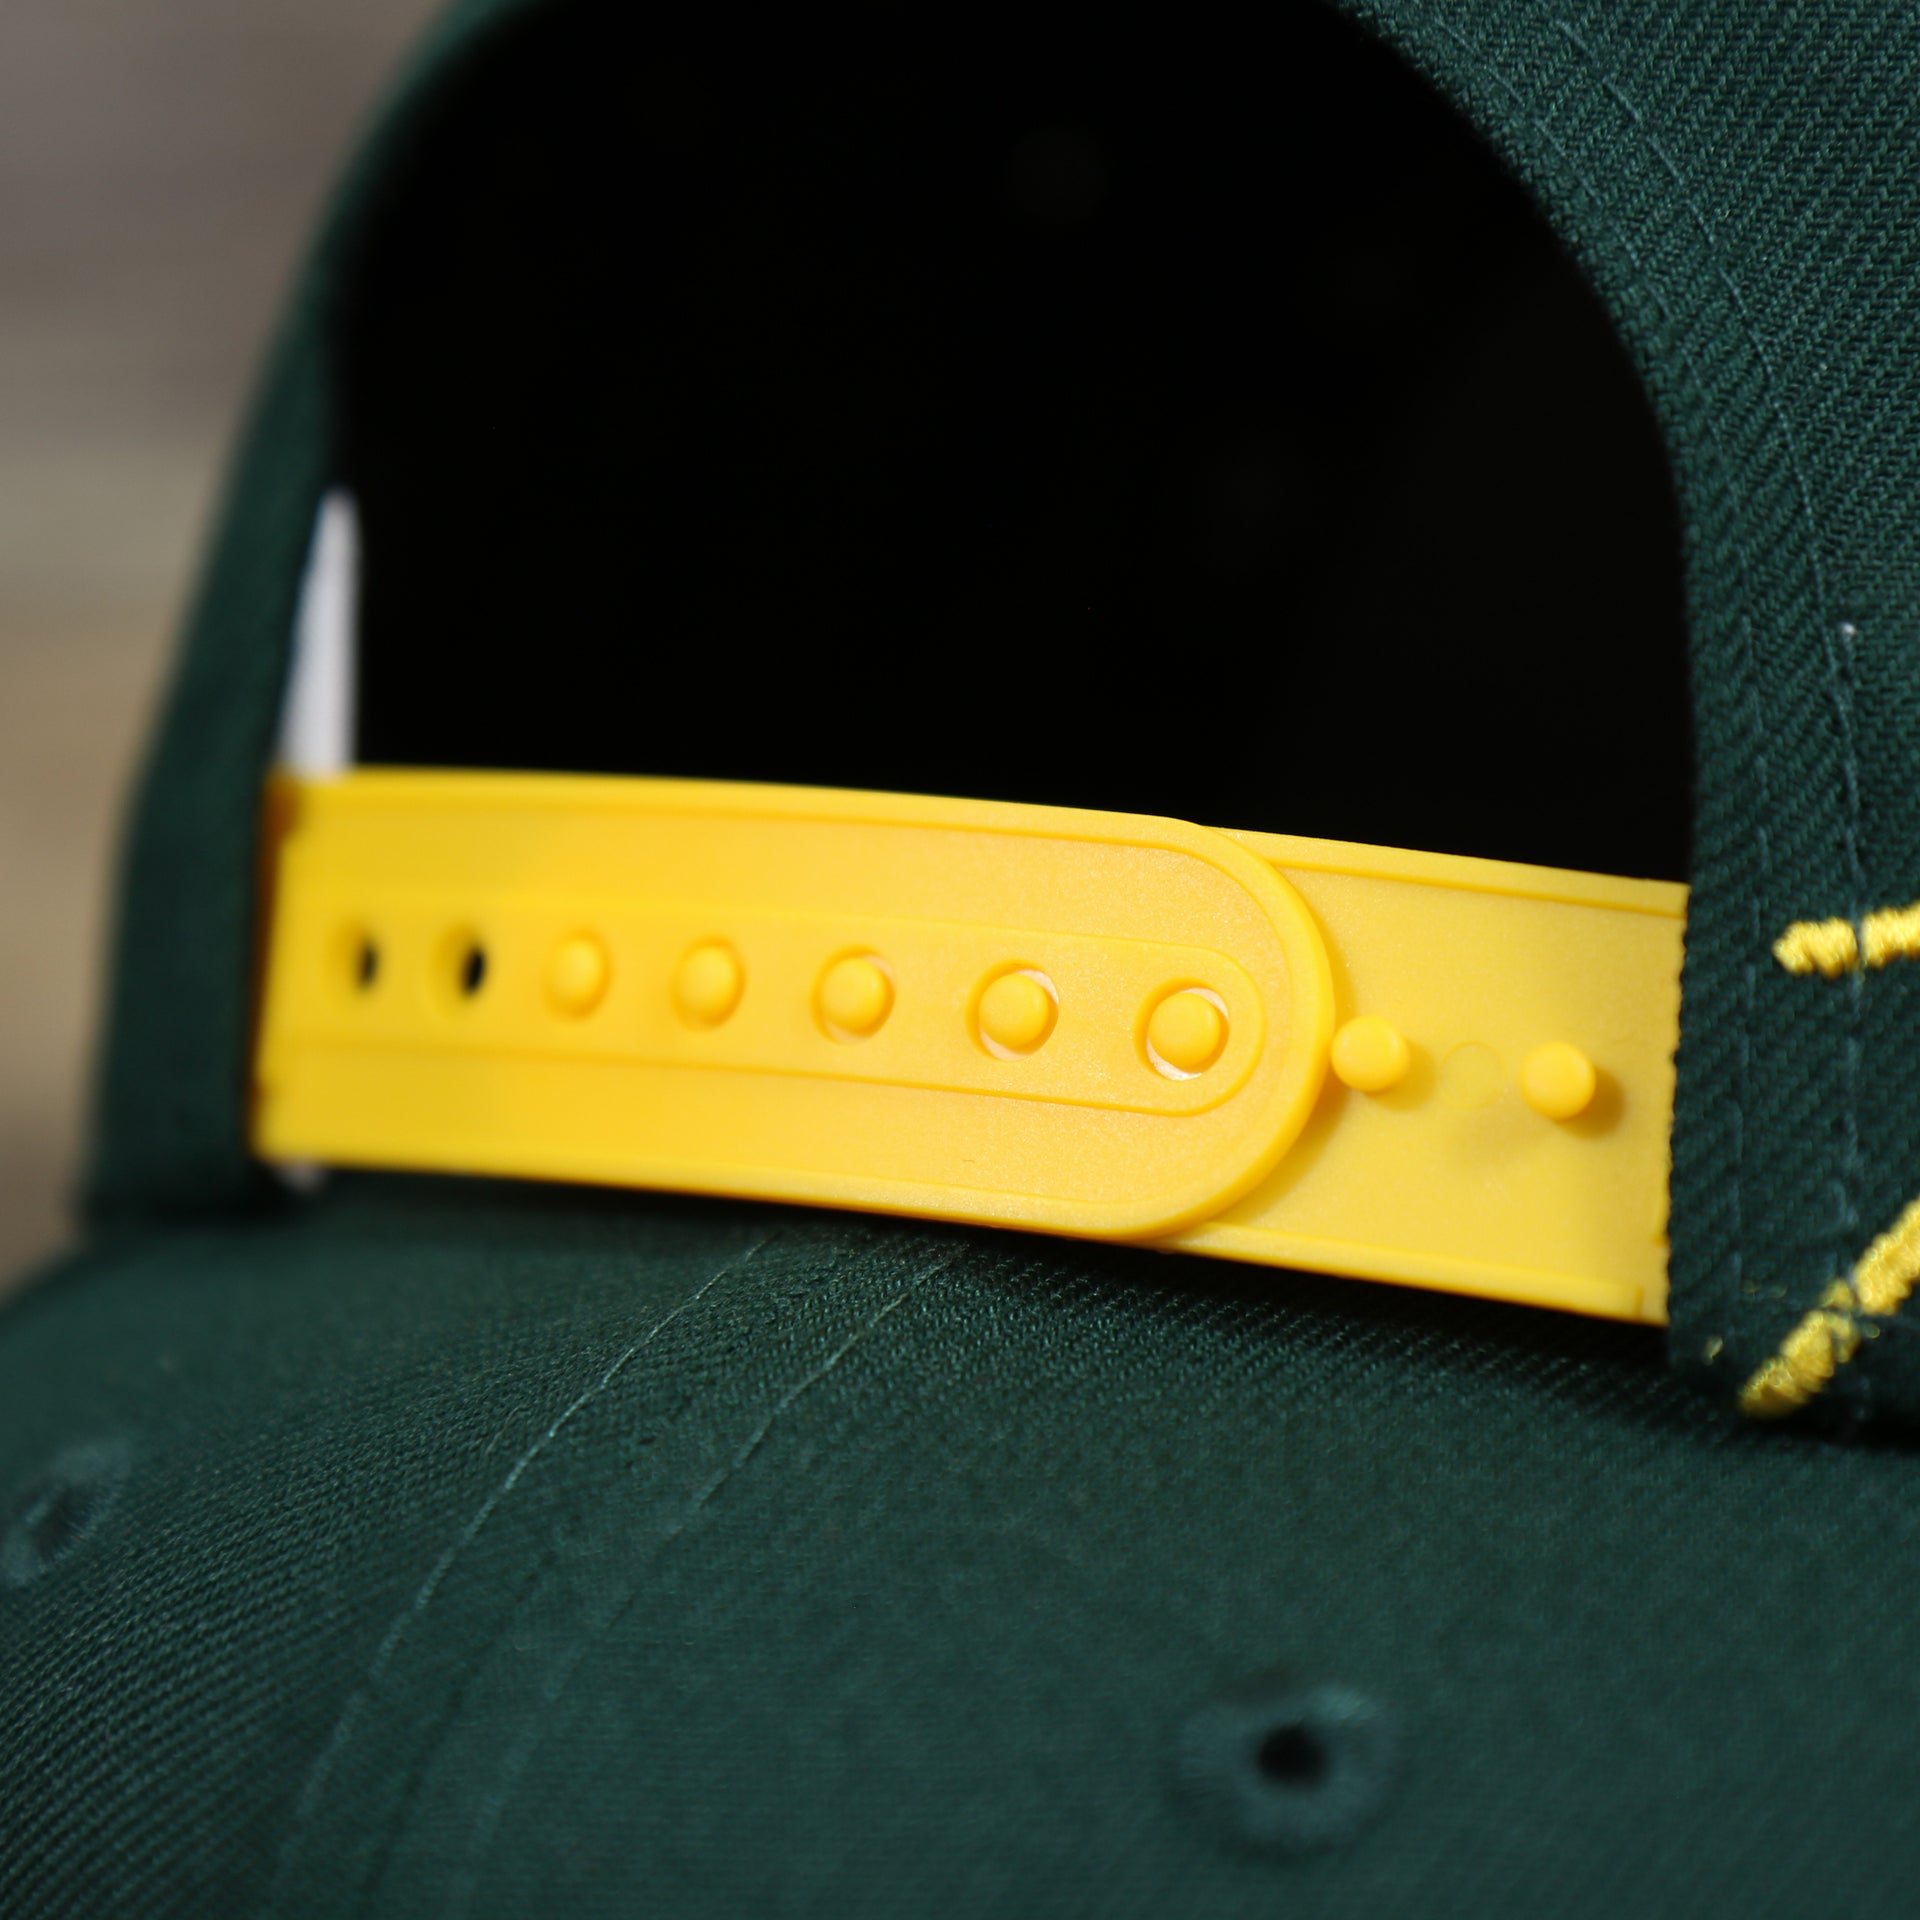 The Yellow Adjustable Strap on the Oakland Athletics MLB Side Font Green Bottom 9Fifty Snapback Cap | Black Snap Cap